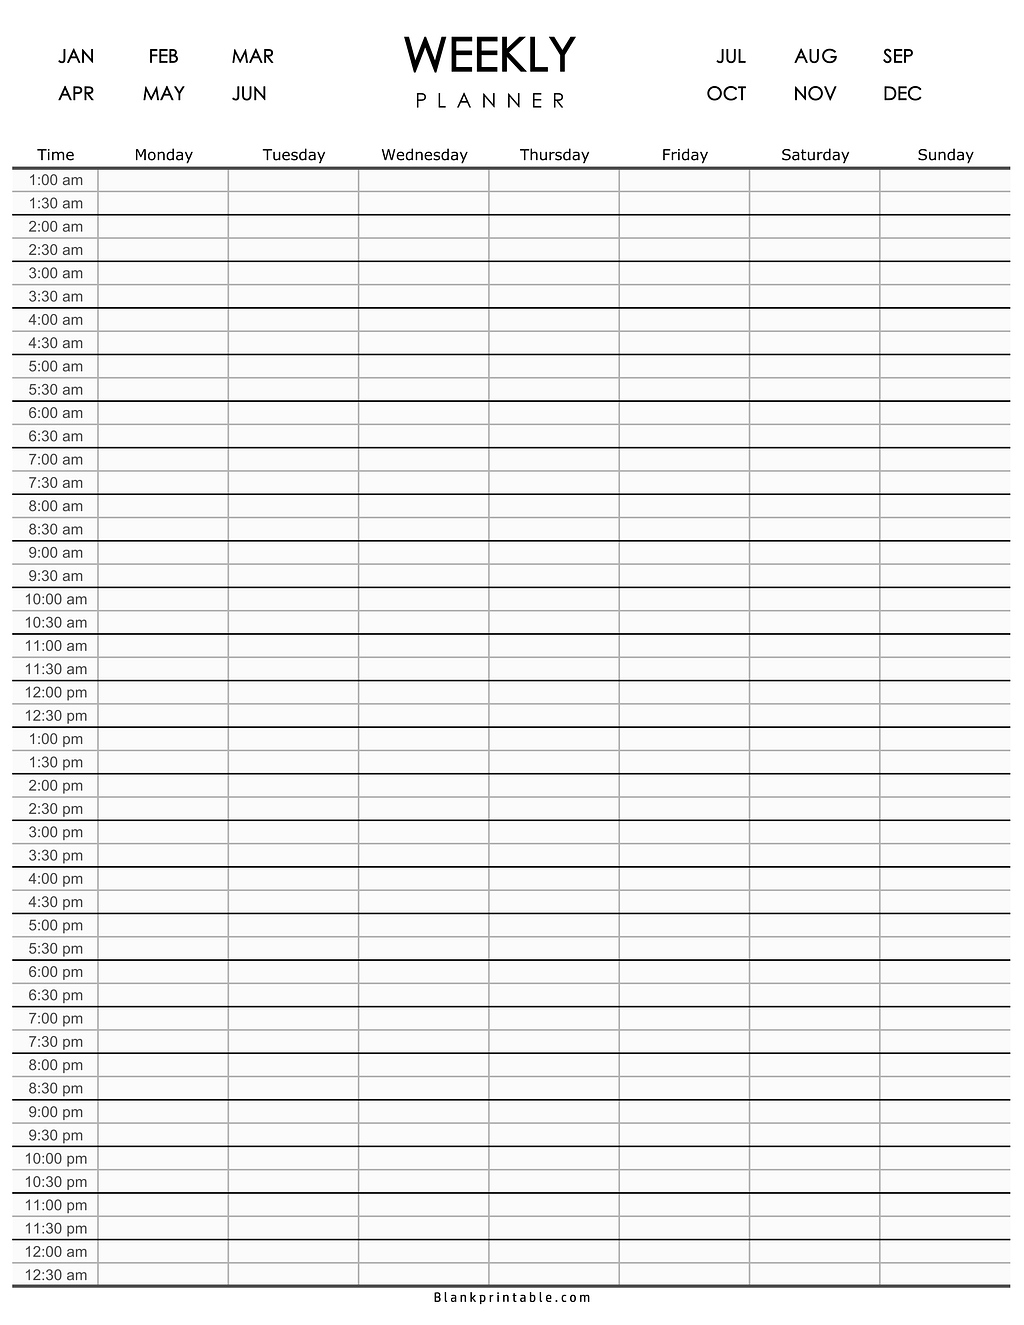 best weekly schedule planner template from Monday to Sunday